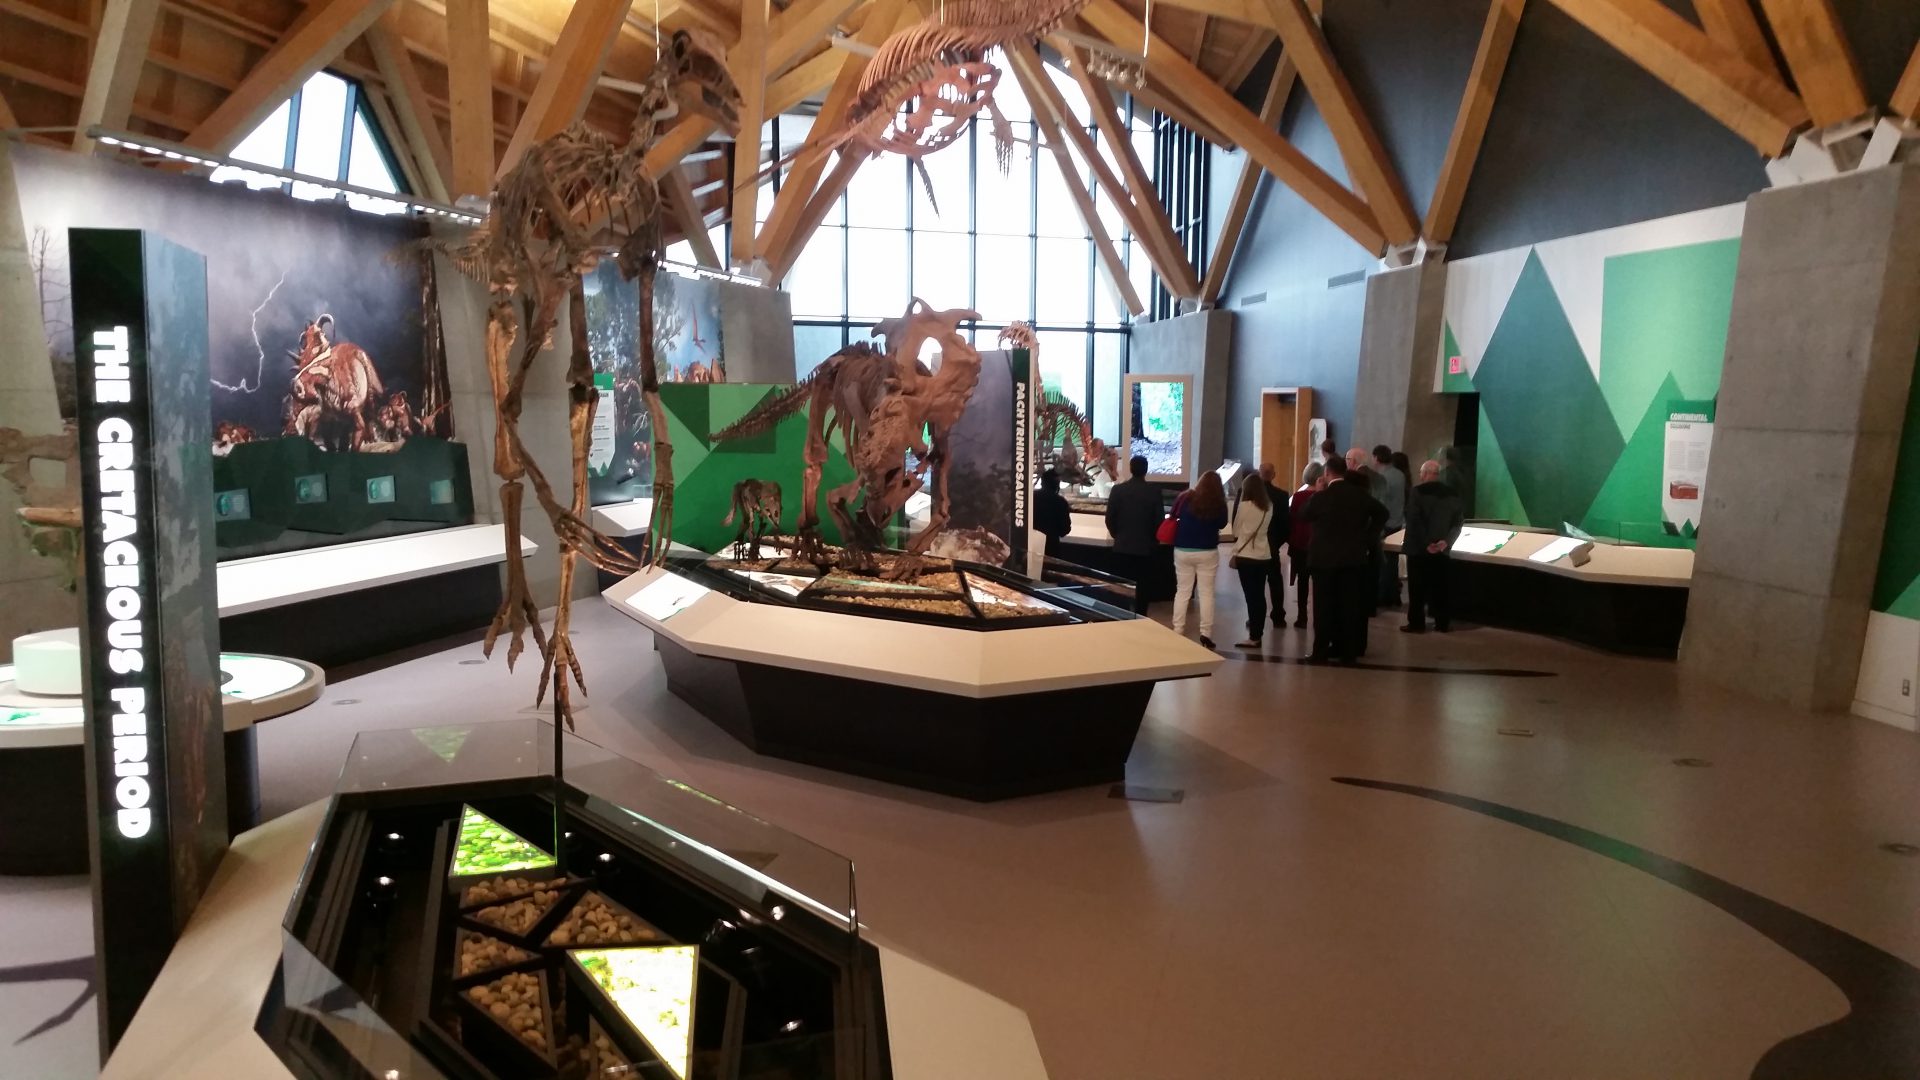 Advance from County helps dino museum balance books